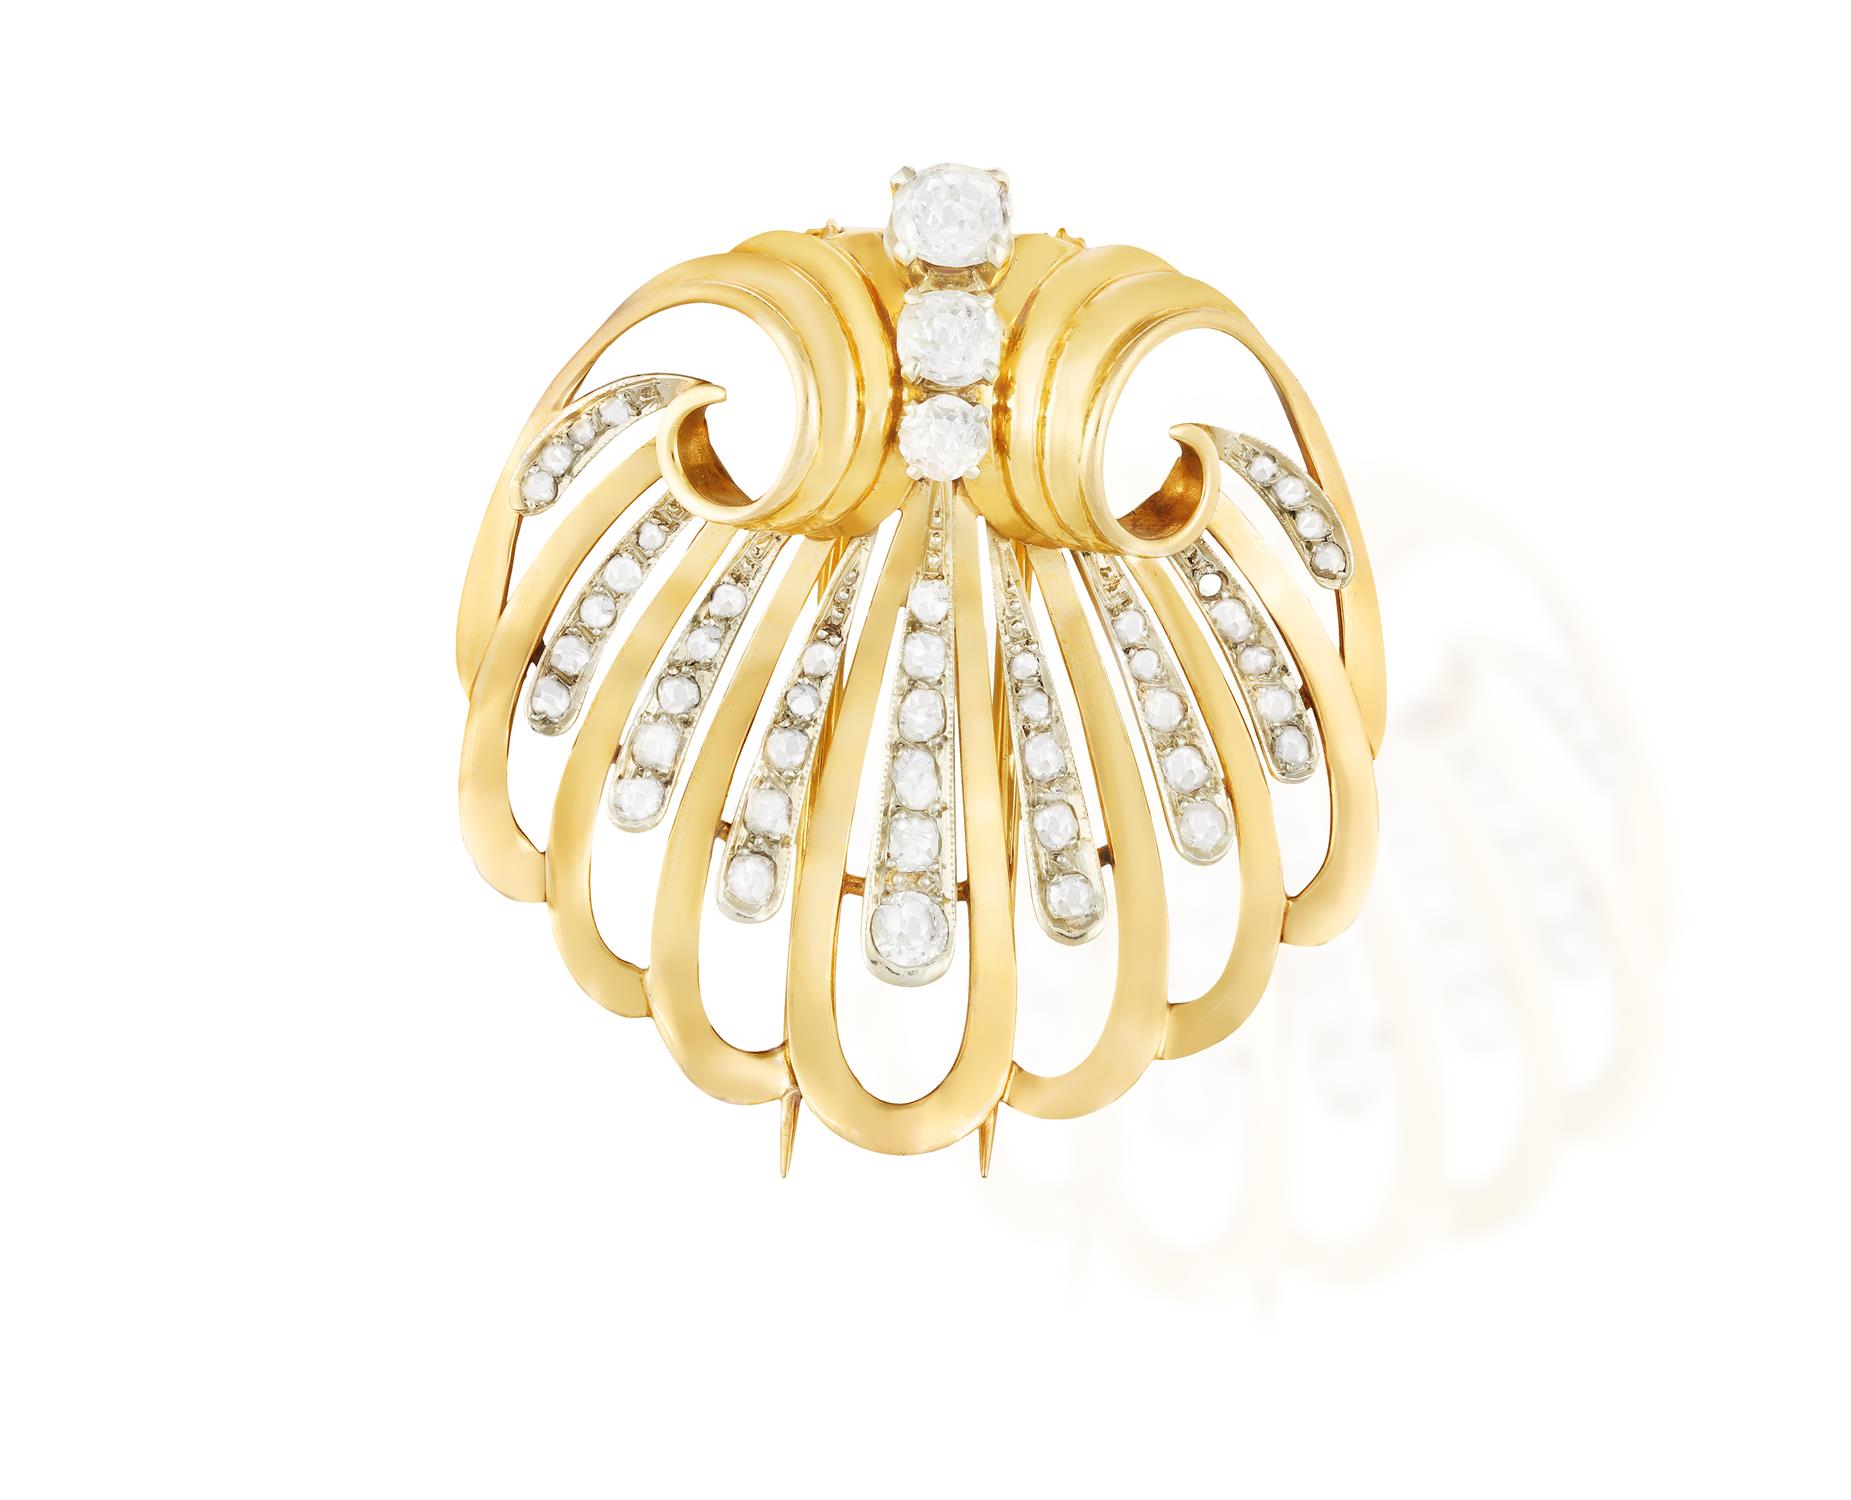 A RETRO DIAMOND BROOCH, FRENCH, CIRCA 1945 Modelled as an openwork shell with fluted scrolling